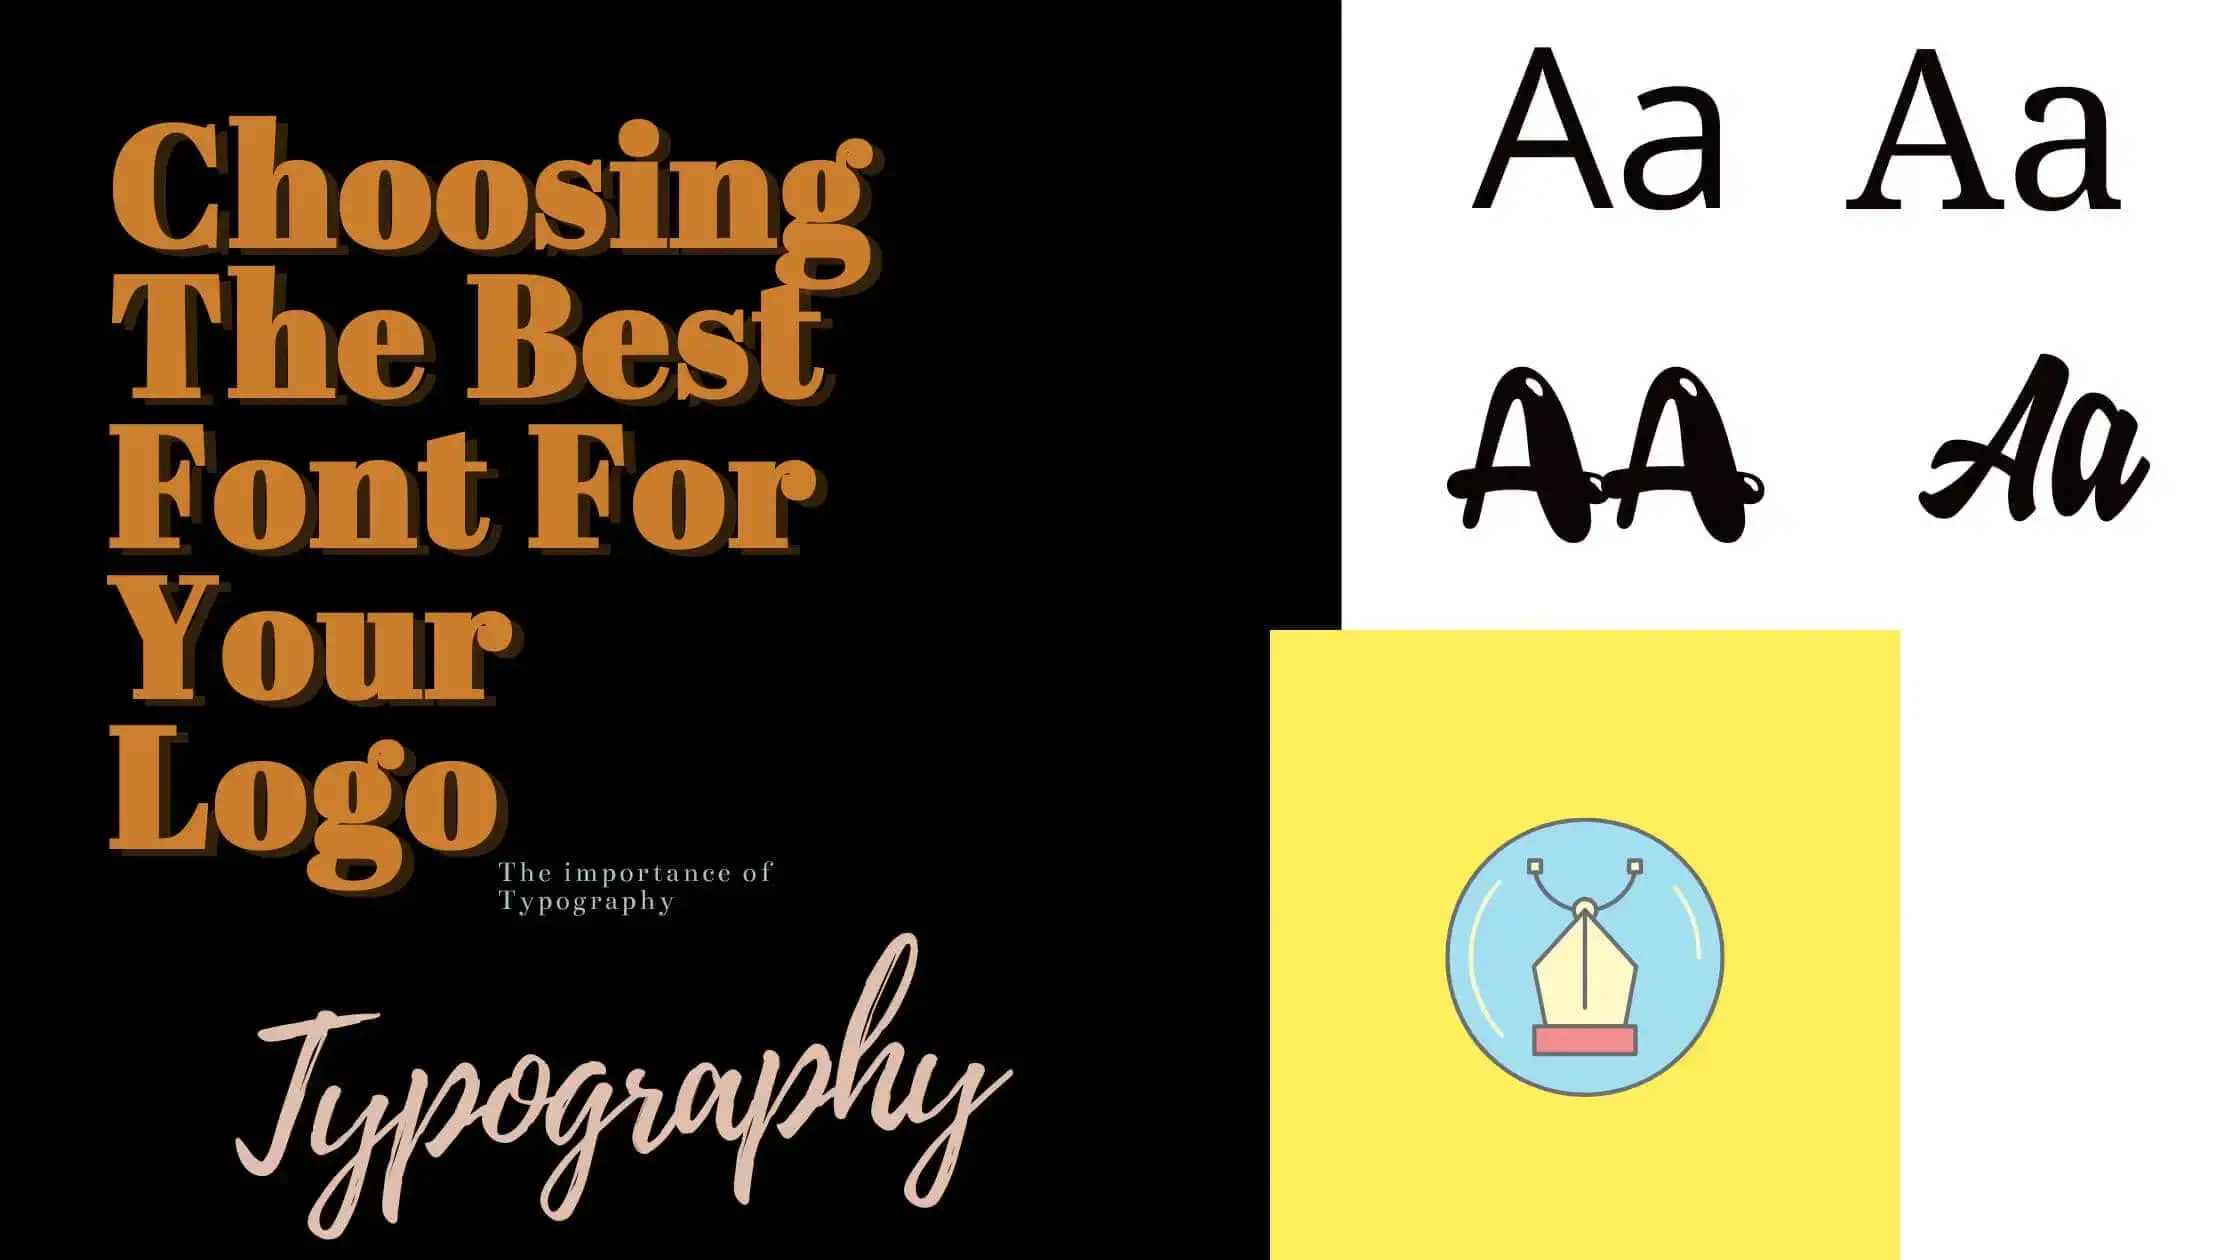 Choosing The Best Font For Your Logo